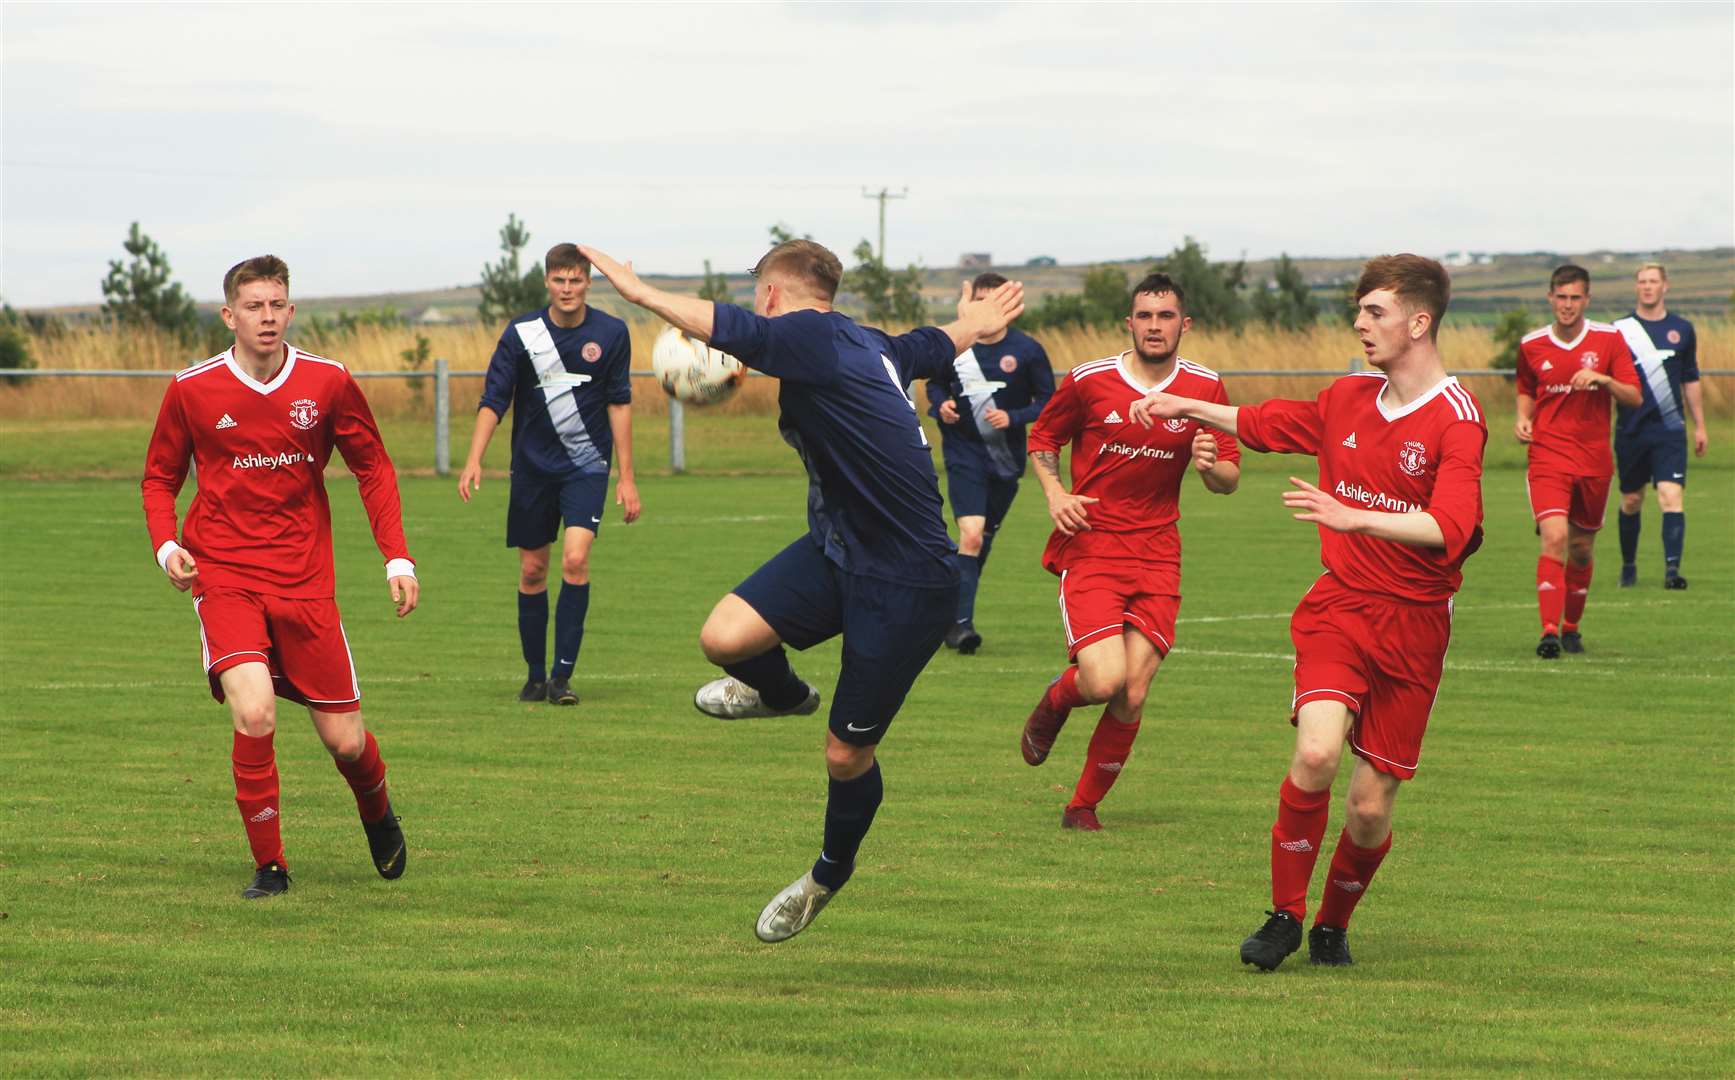 Halkirk United's Korbyn Cameron receives the ball while surrounded by Thurso players during Saturday's derby at Morrison Park.